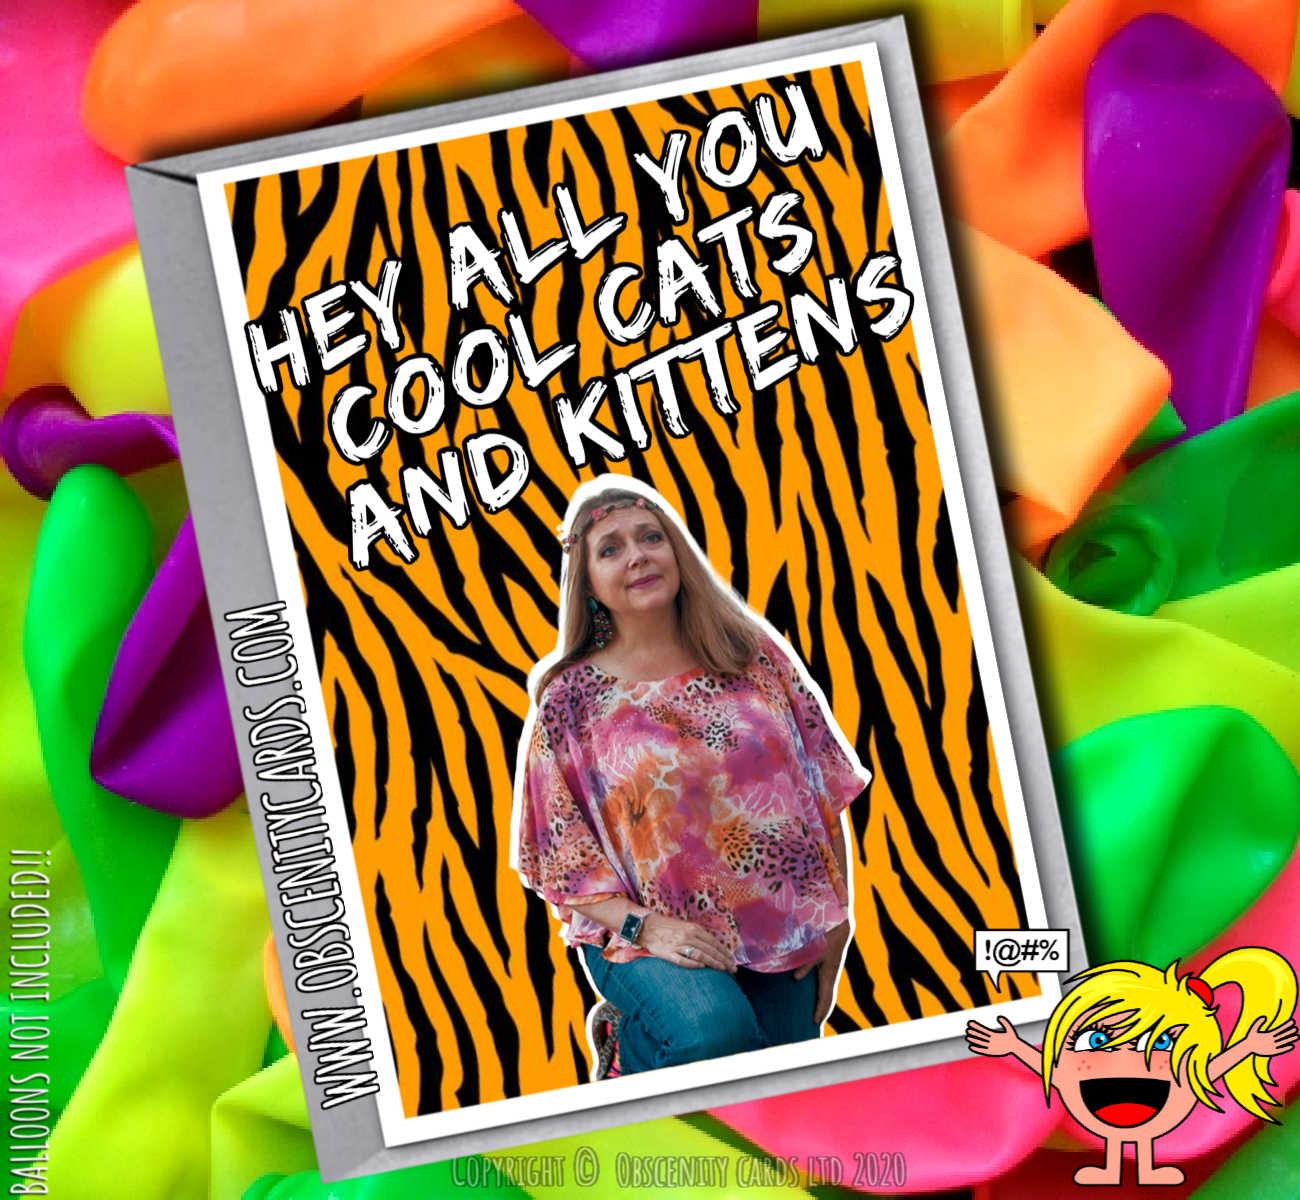 HEY ALL YOU COOL CATS AND KITTENS CAROLE BASKIN TIGER KING FUNNY CARD